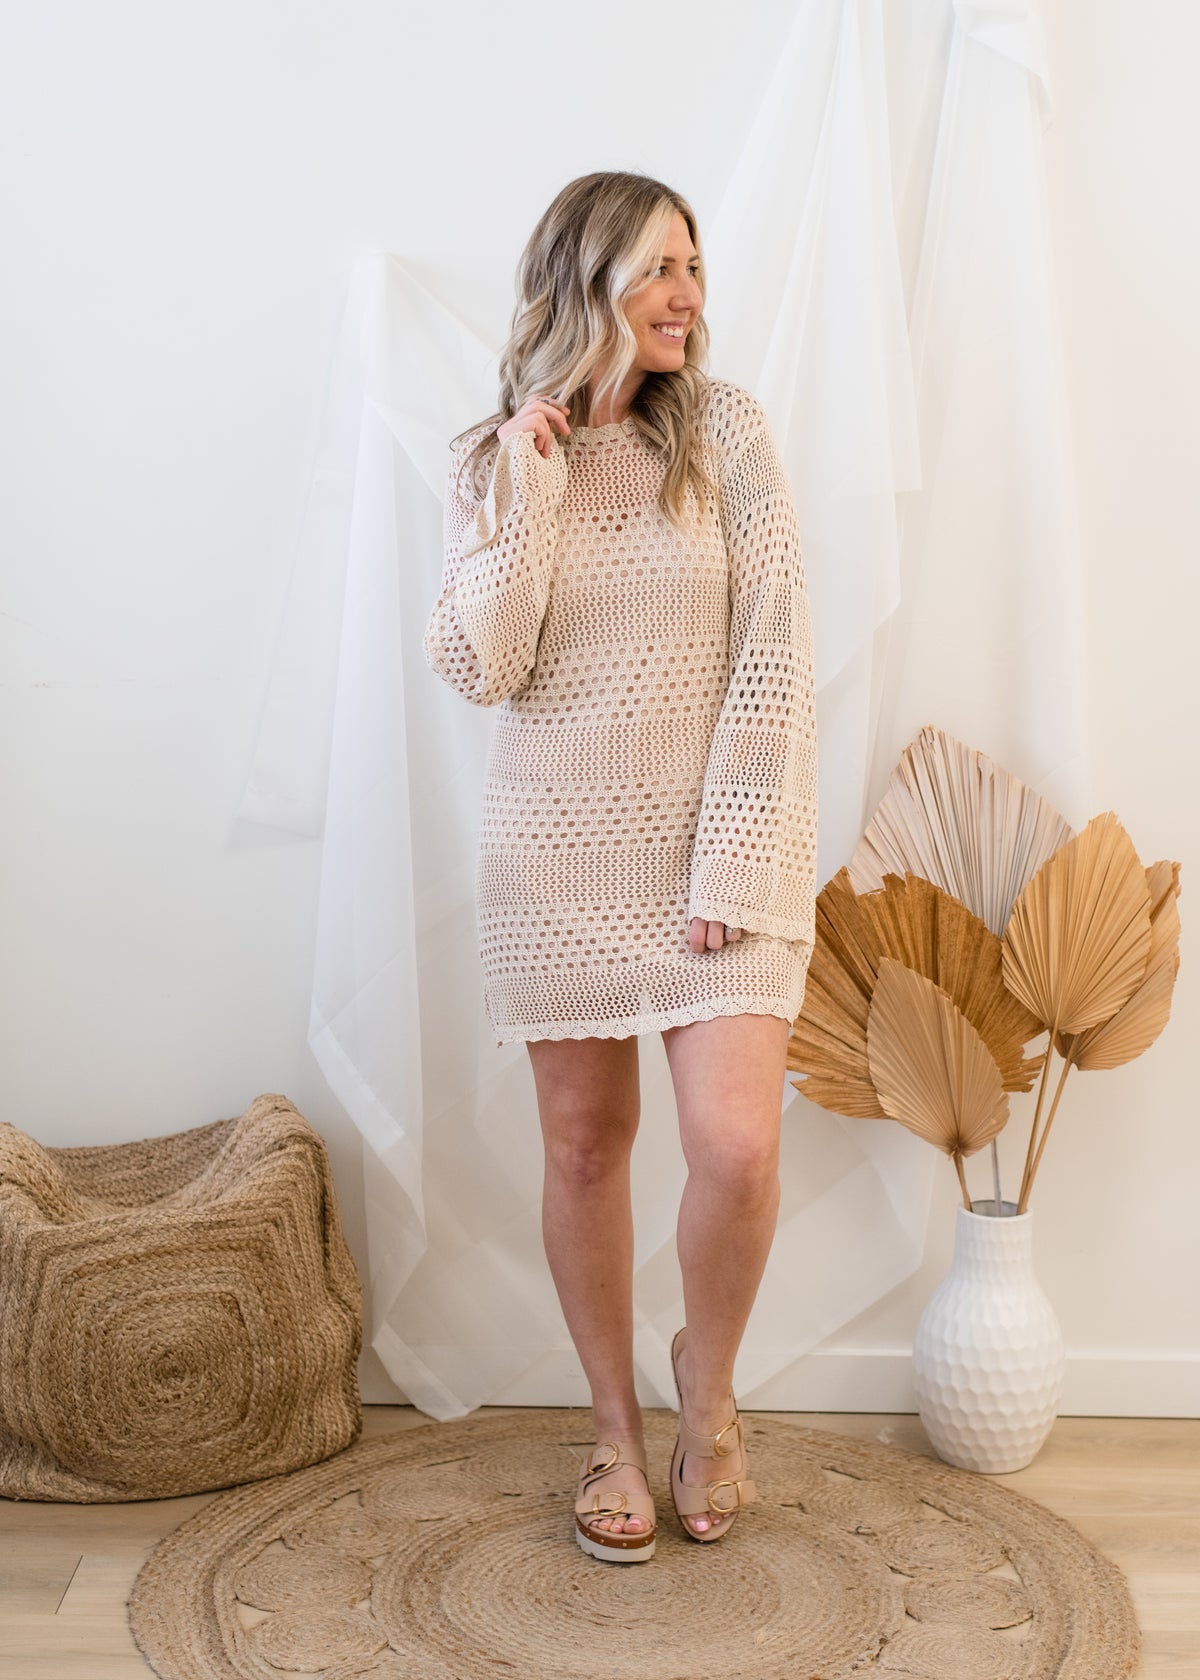 The Crochet Cover Up